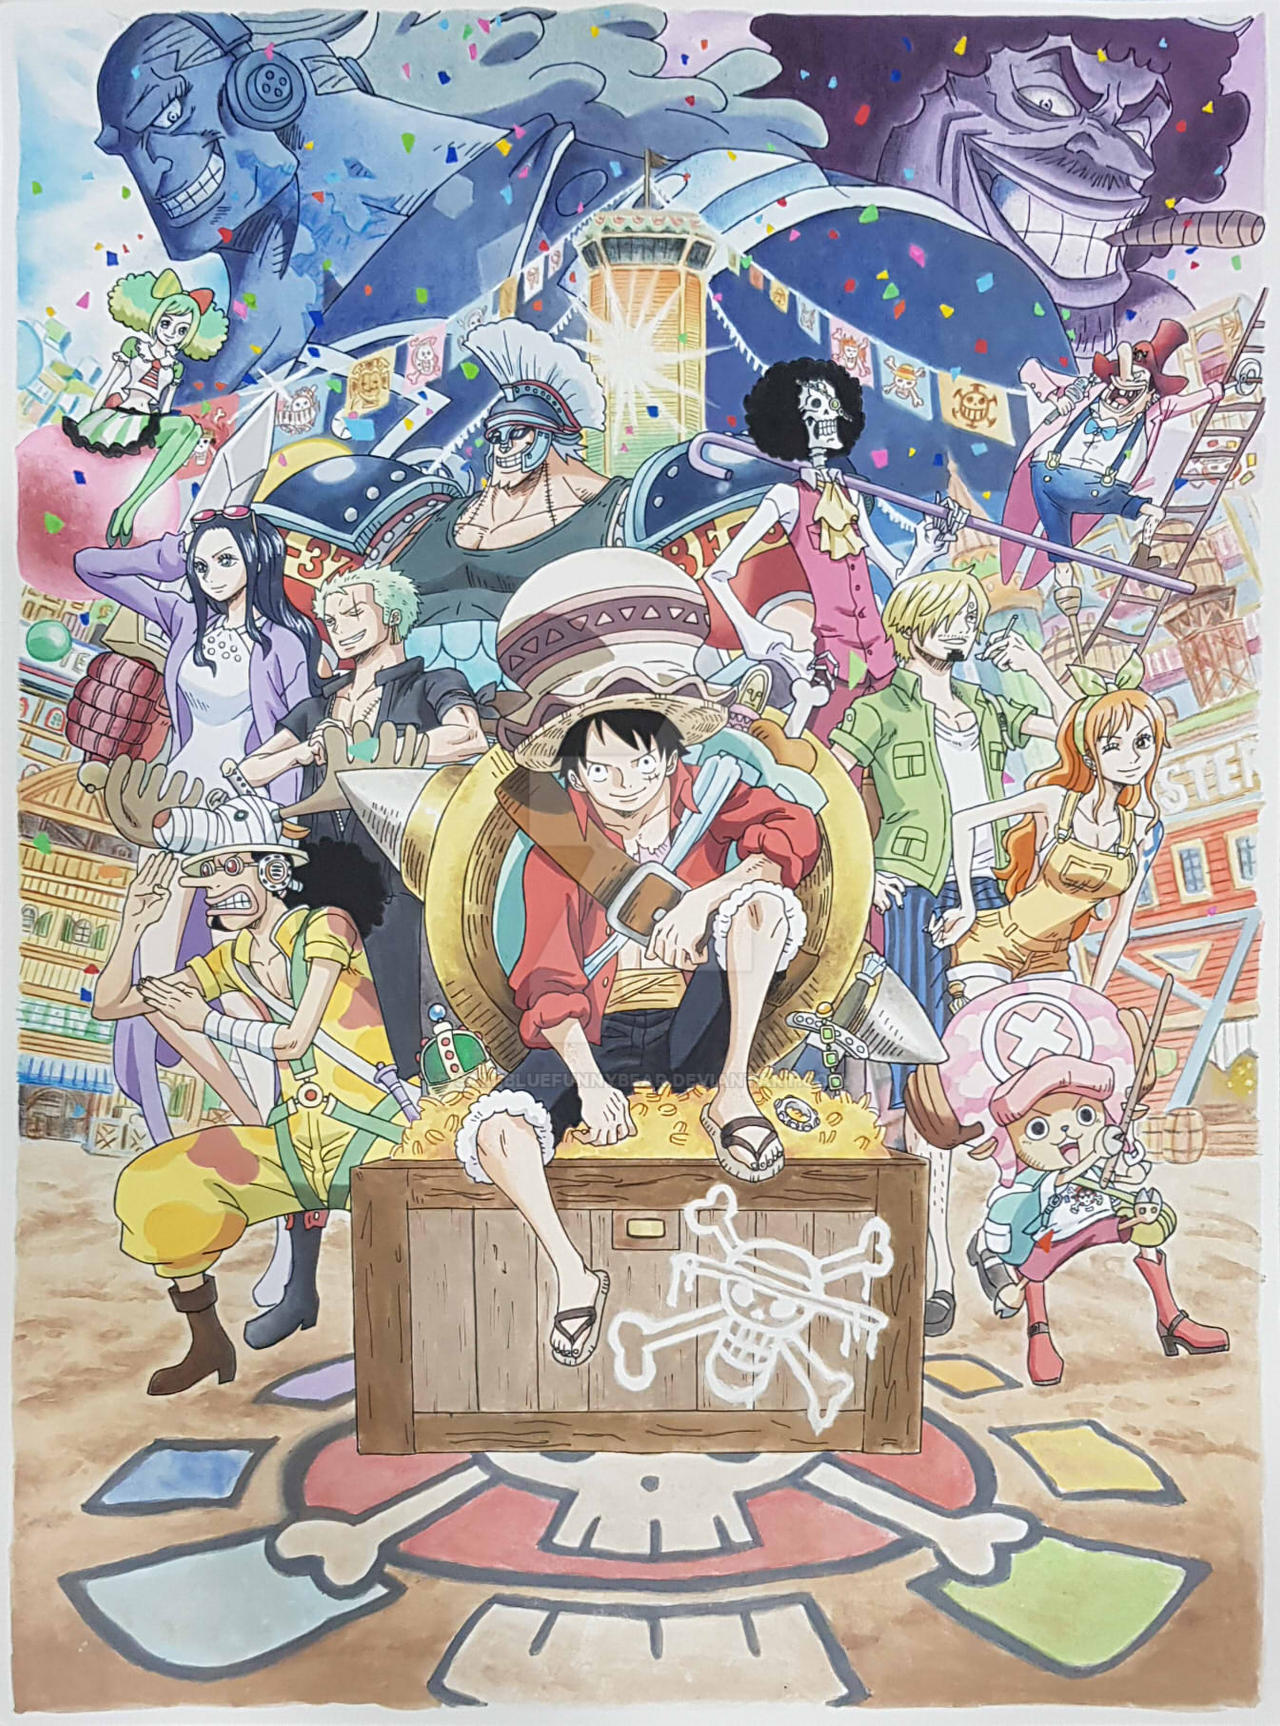 Breaking Down the Events of One Piece: Stampede